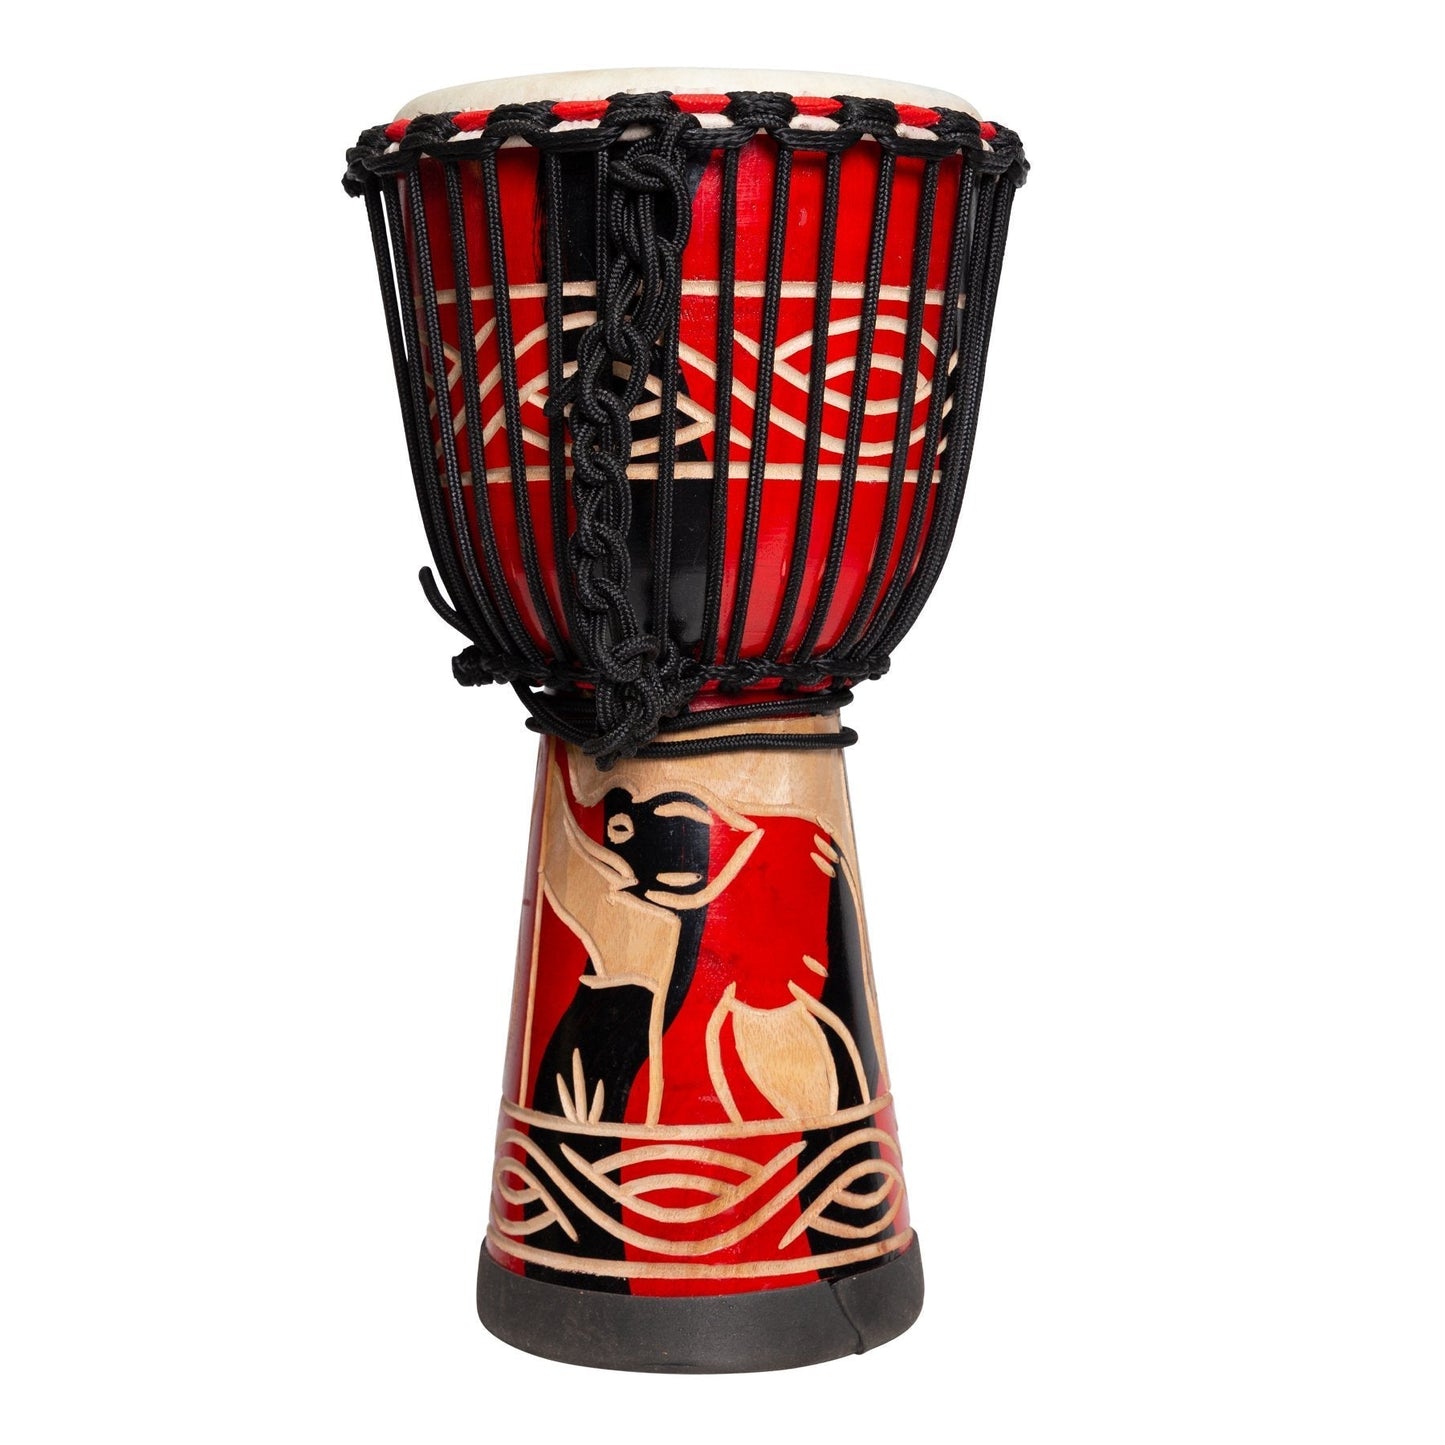 Drumfire 'Majestic Series' 8" Natural Hide Traditional Rope Djembe (Red)